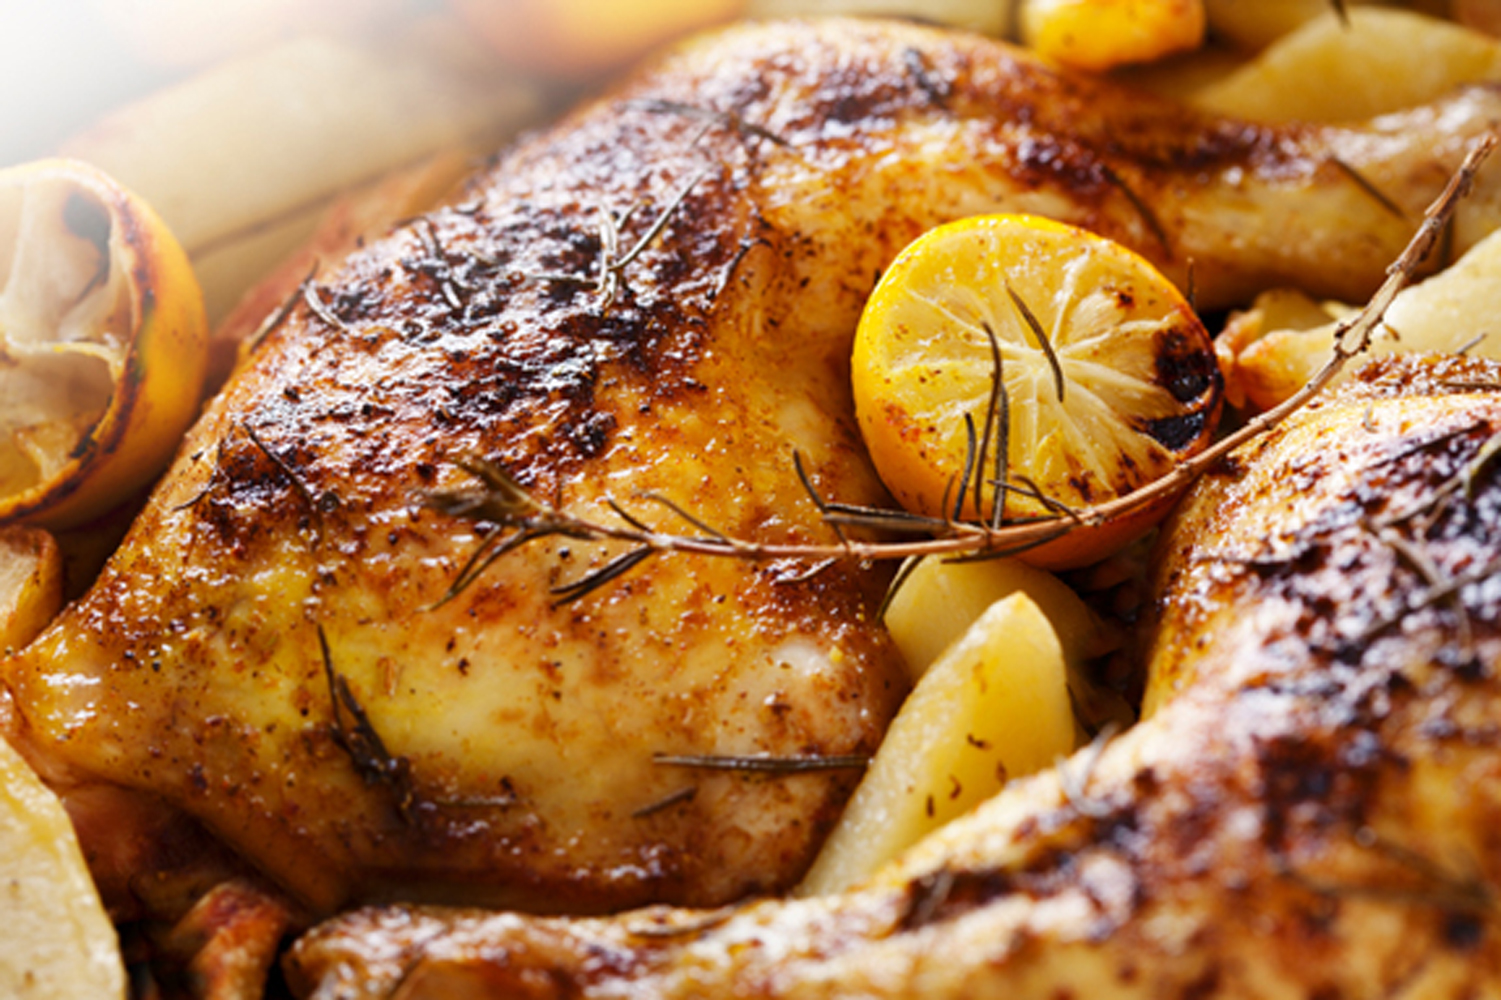 Grilled Roasted Chicken – Leite's Culinaria